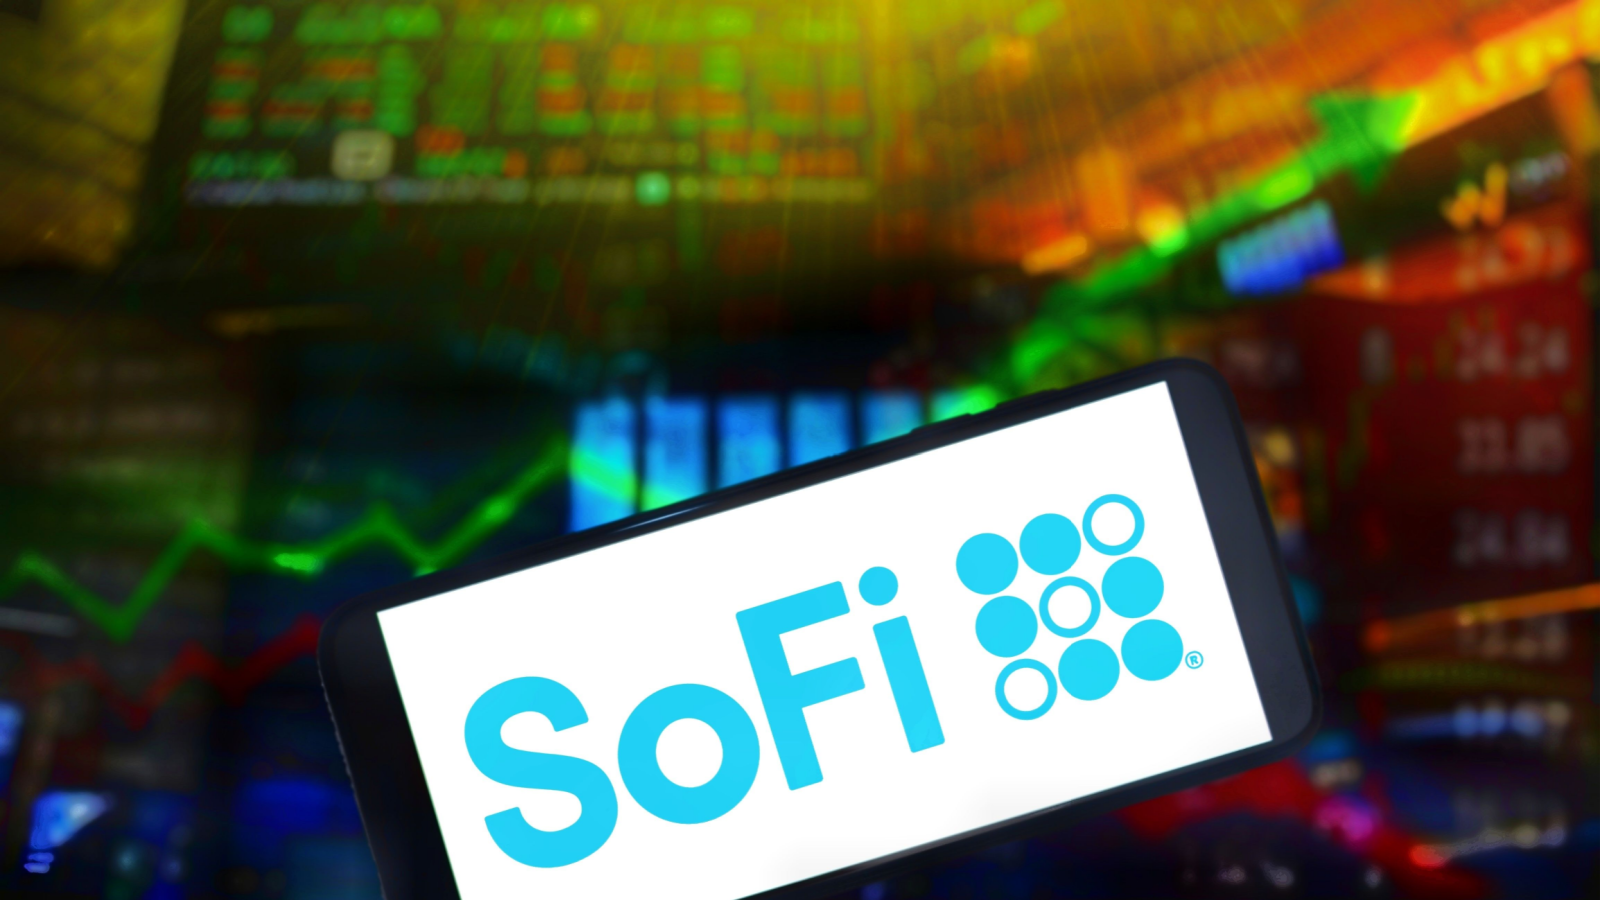 Could SoFi Be a Millionaire-Maker Stock?